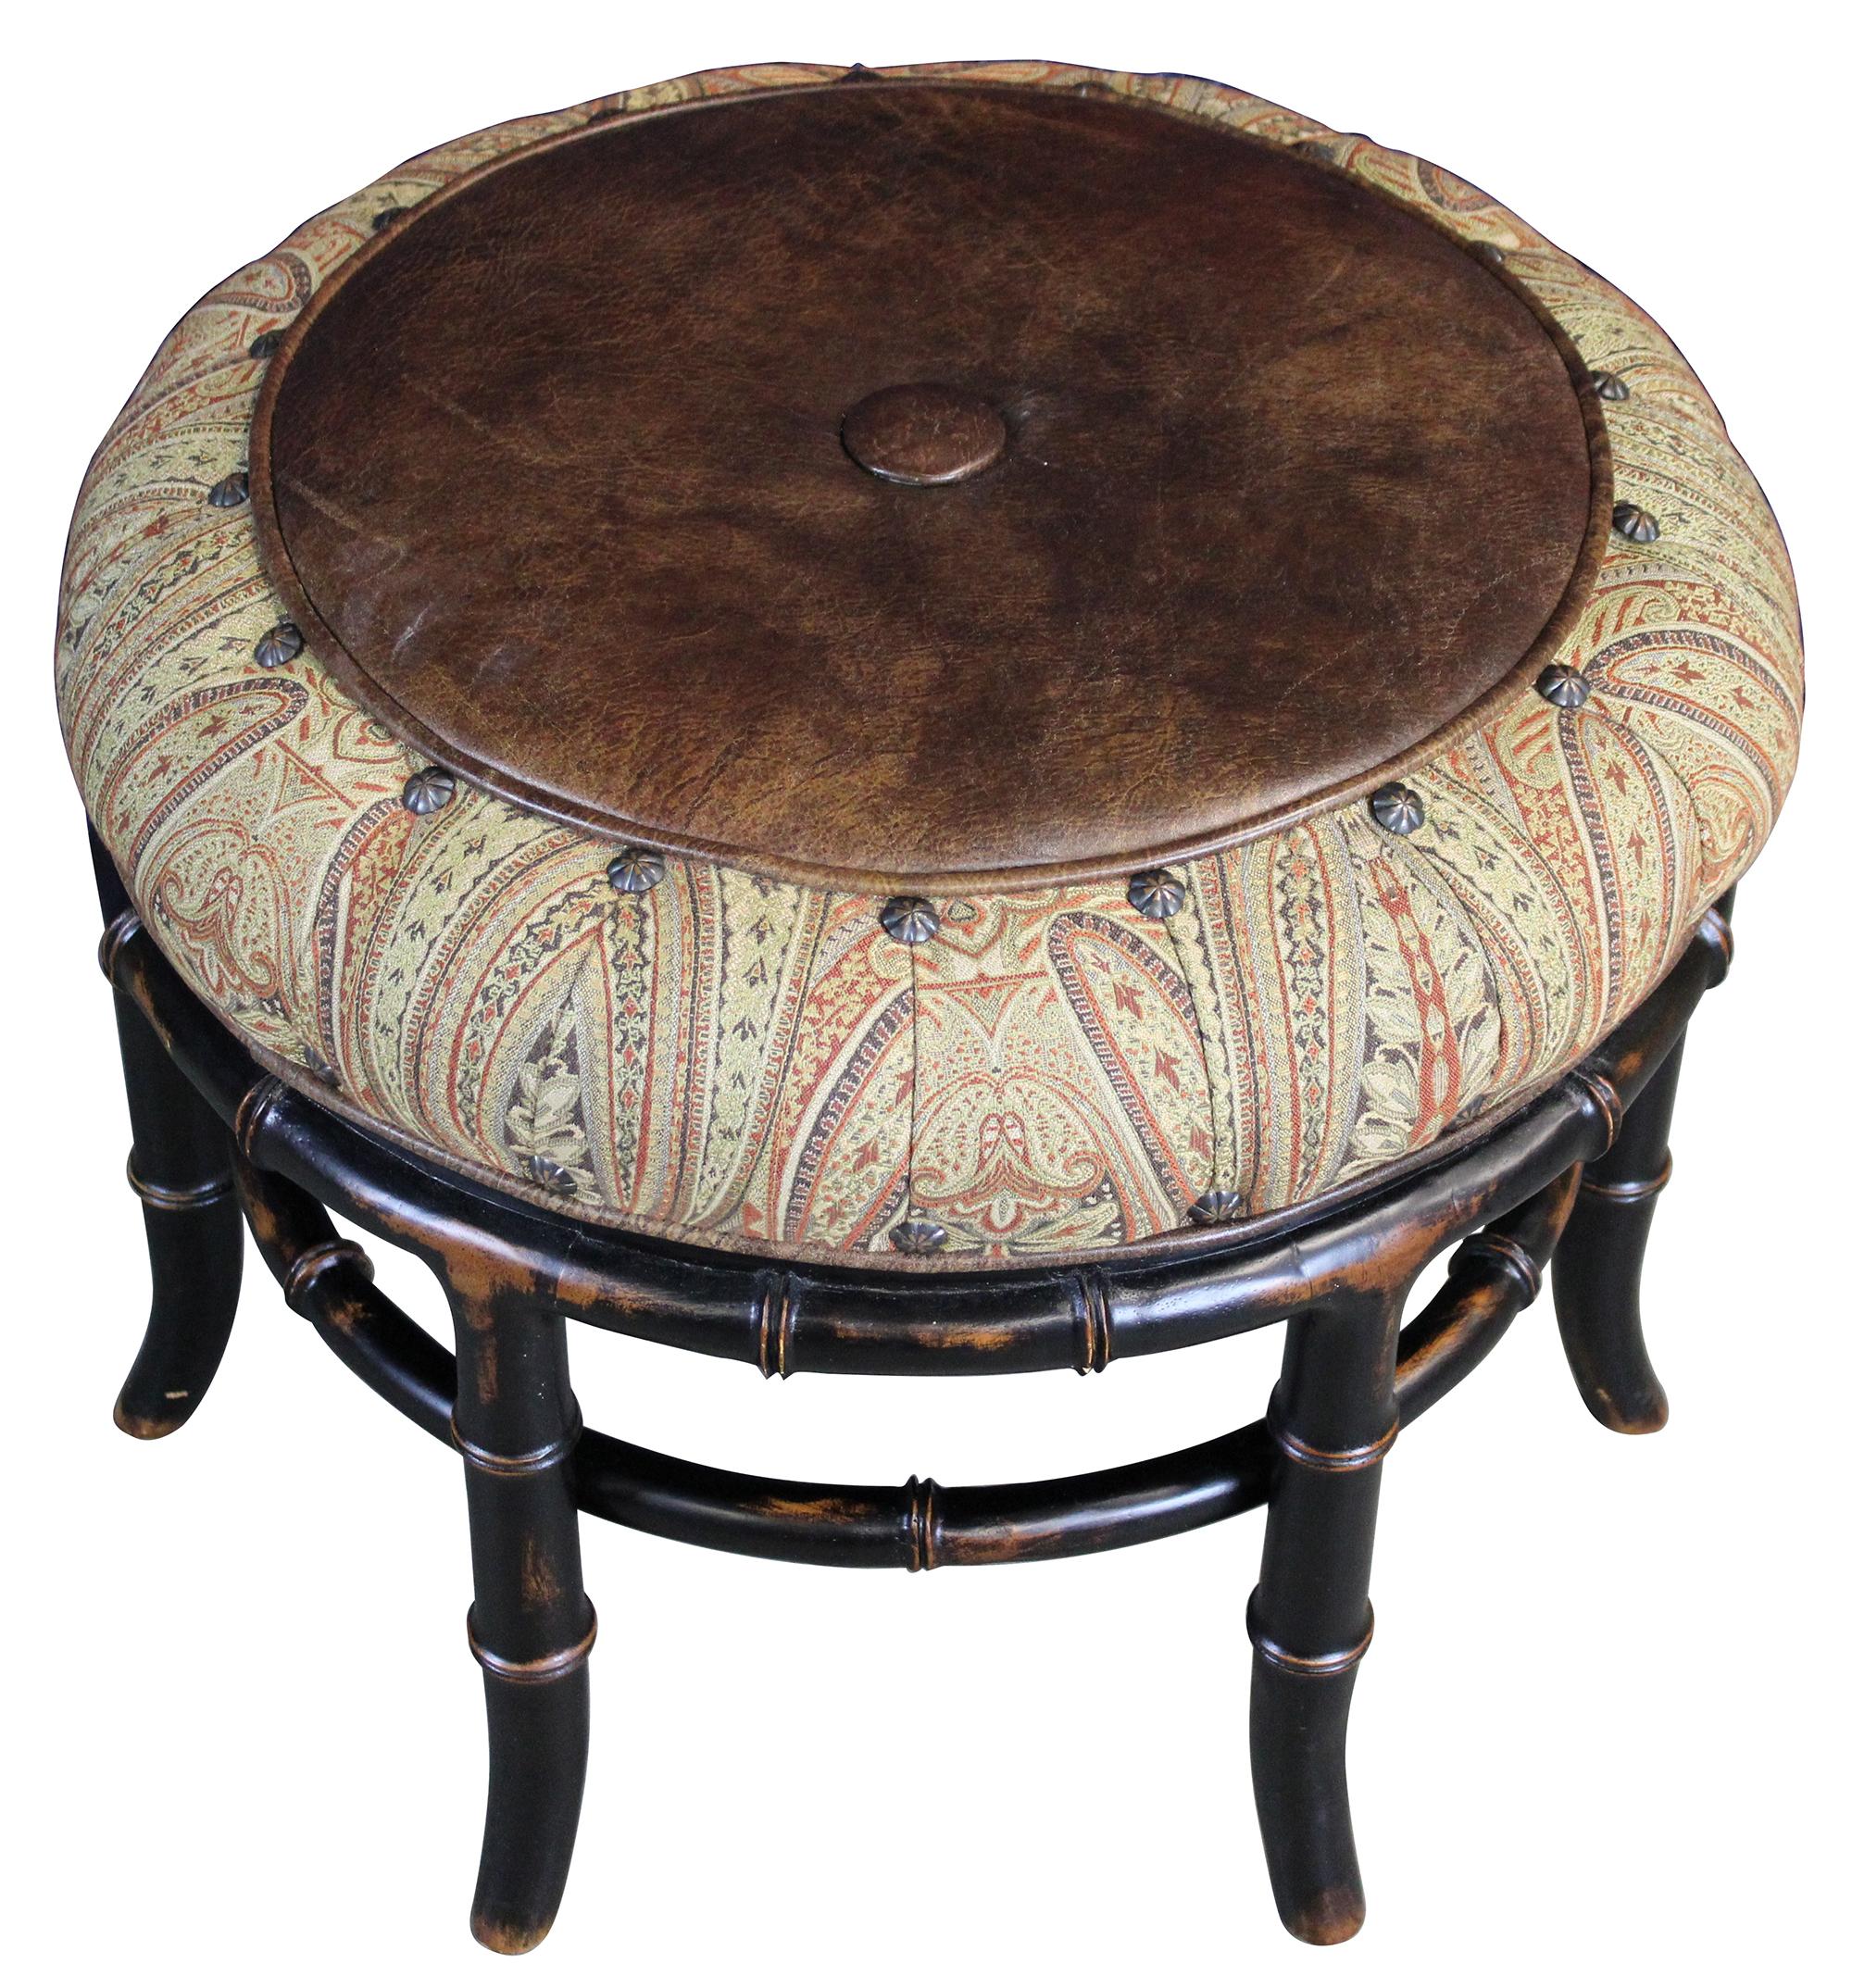 A stunning footstool or bench by Vanguard Furniture. Features a brown leather and paisley upholstered seat with nailhead trim. Supported by lacquered and naturally distressed faux bamboo base. Measures: 30